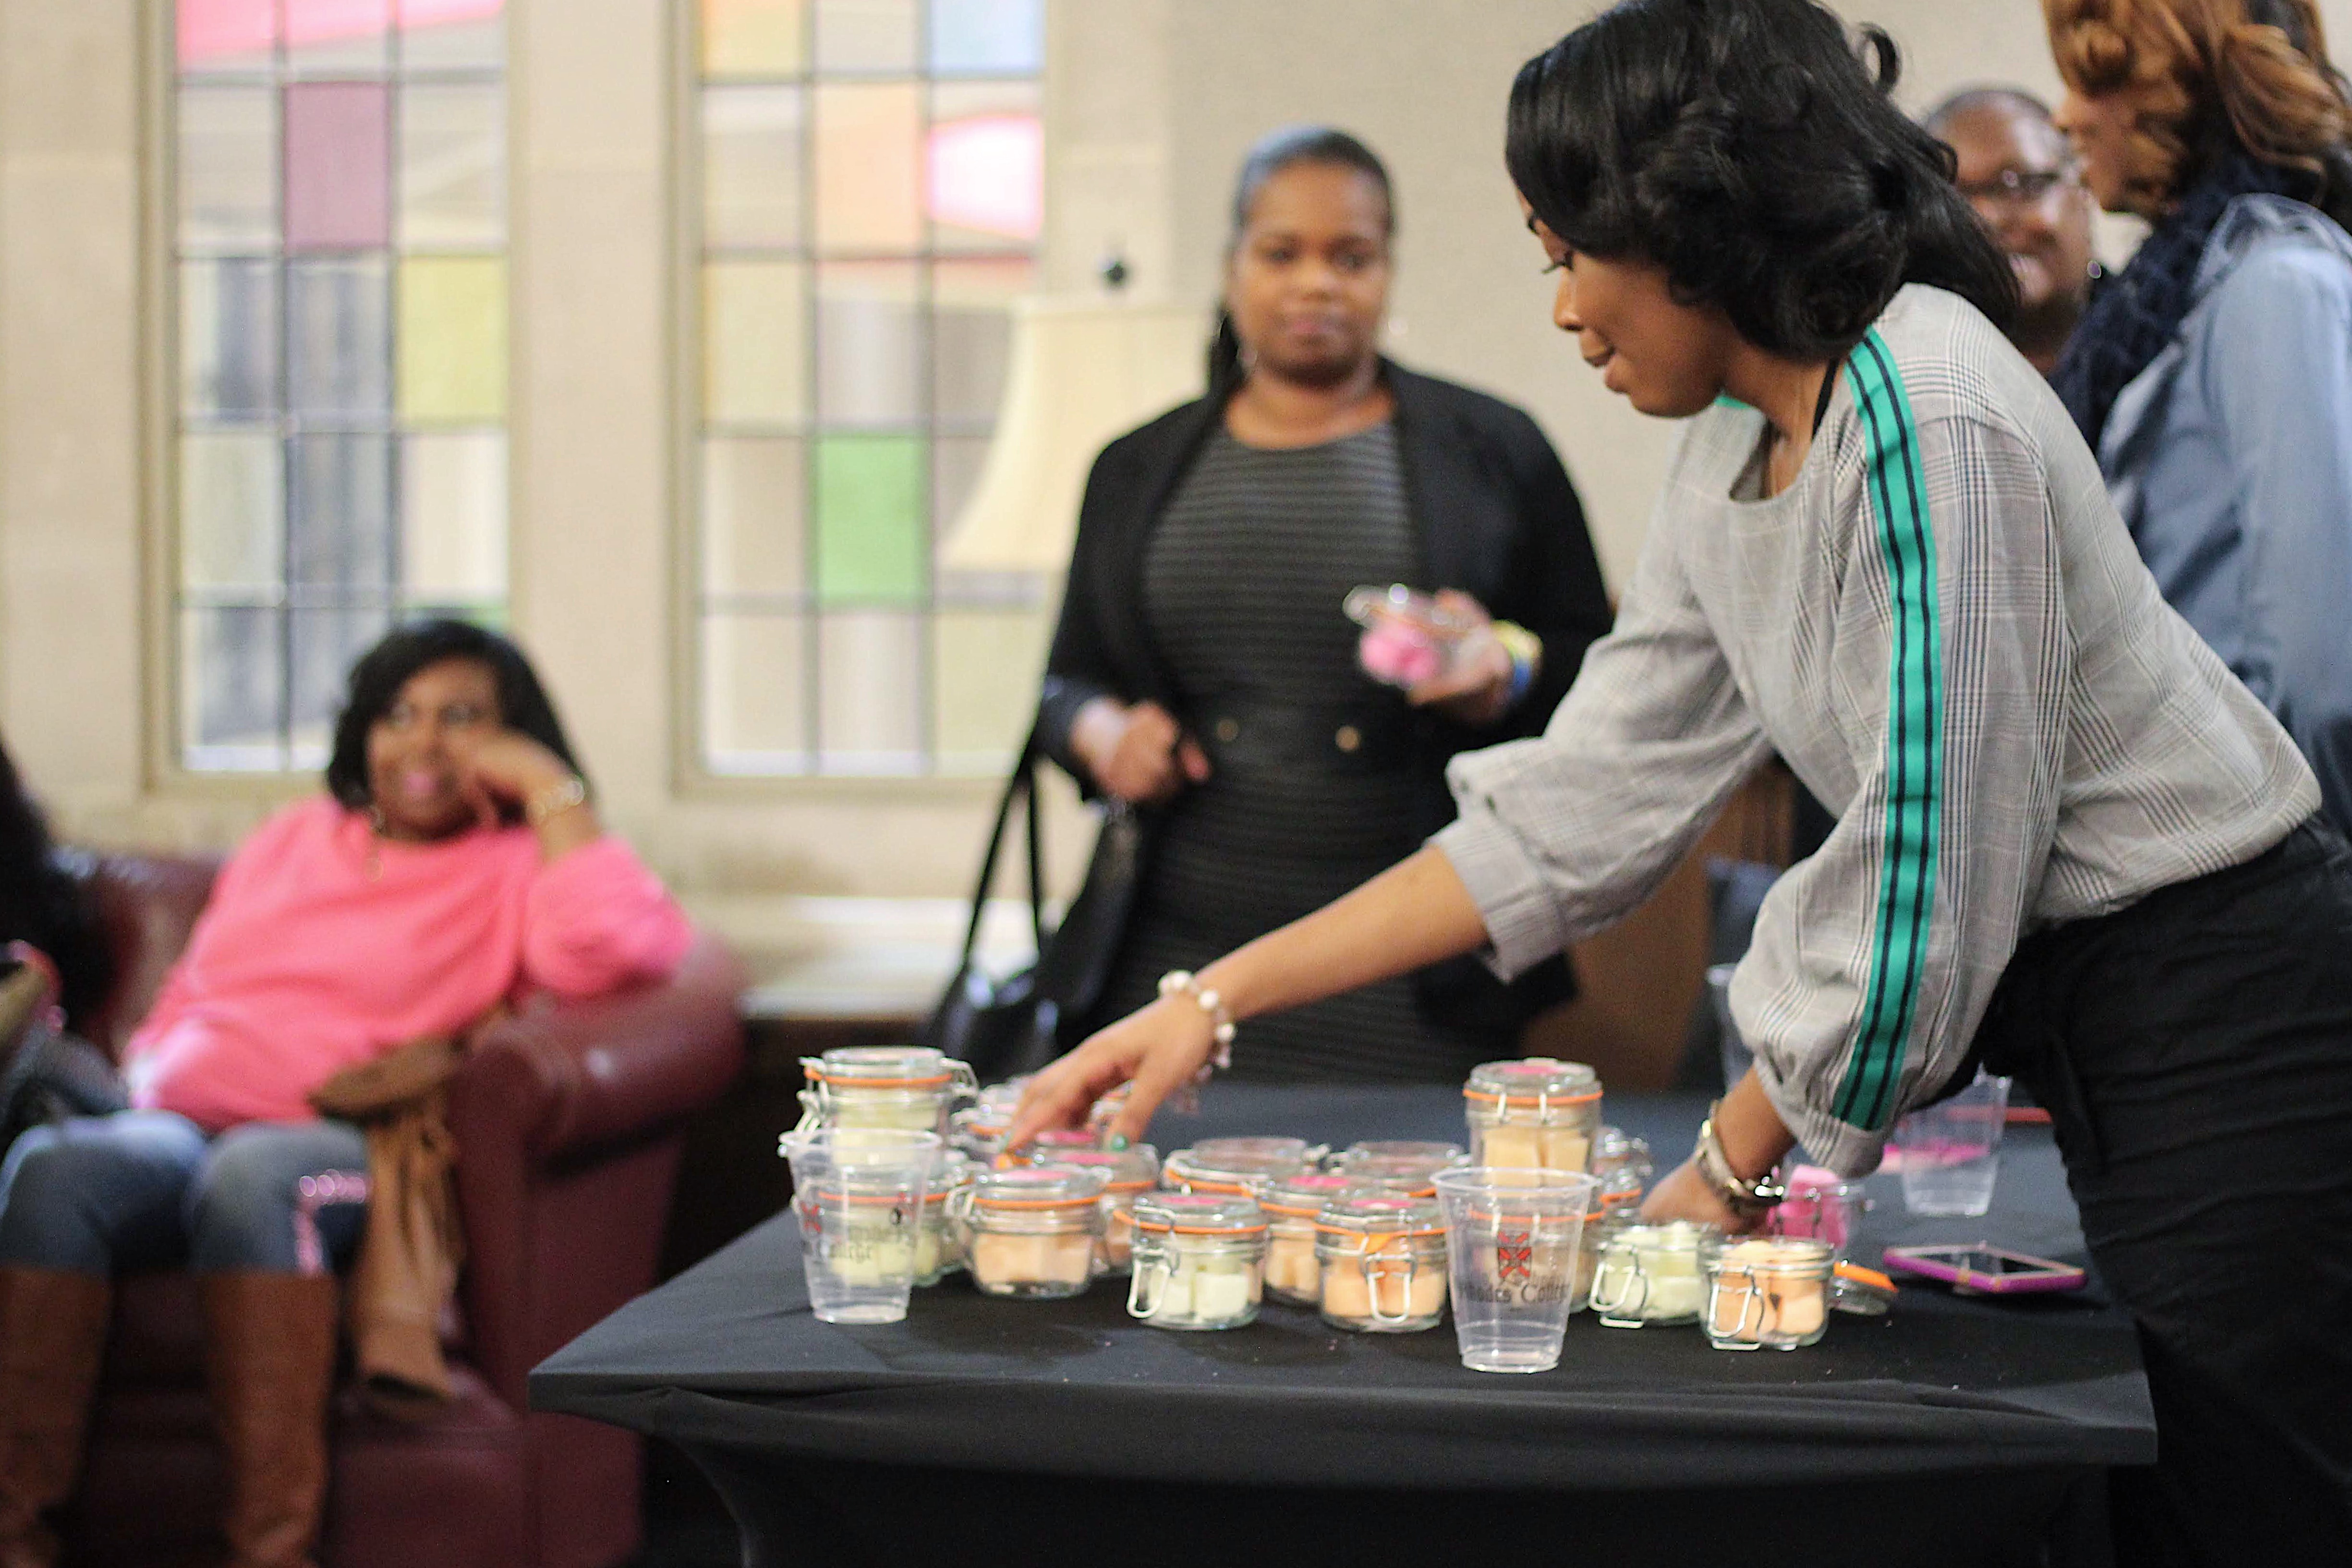 Tatyana Muhammed sold enough of her sugar scrub product to surpass start-up costs for the last 4 months. (Submitted)